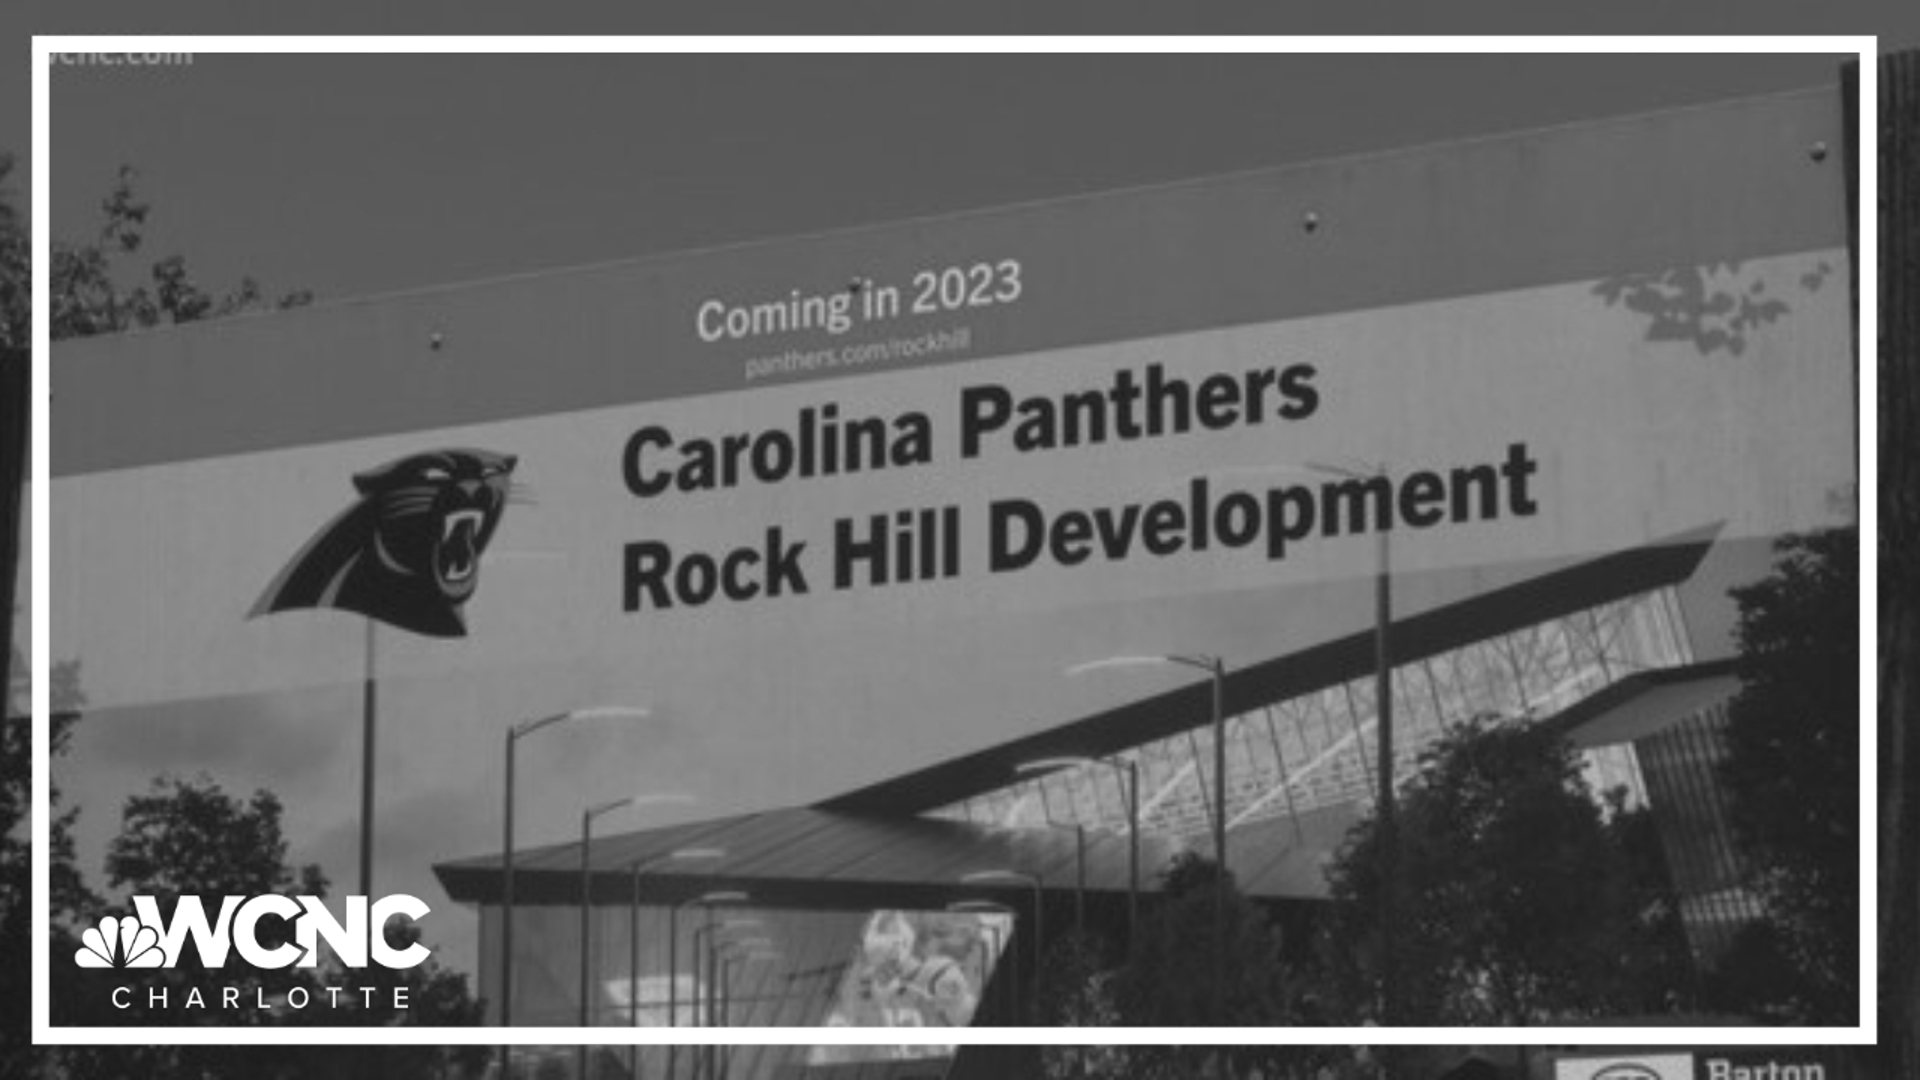 Things are slowly turning around for the beleaguered site that was once fated to house the Panthers' training arena.